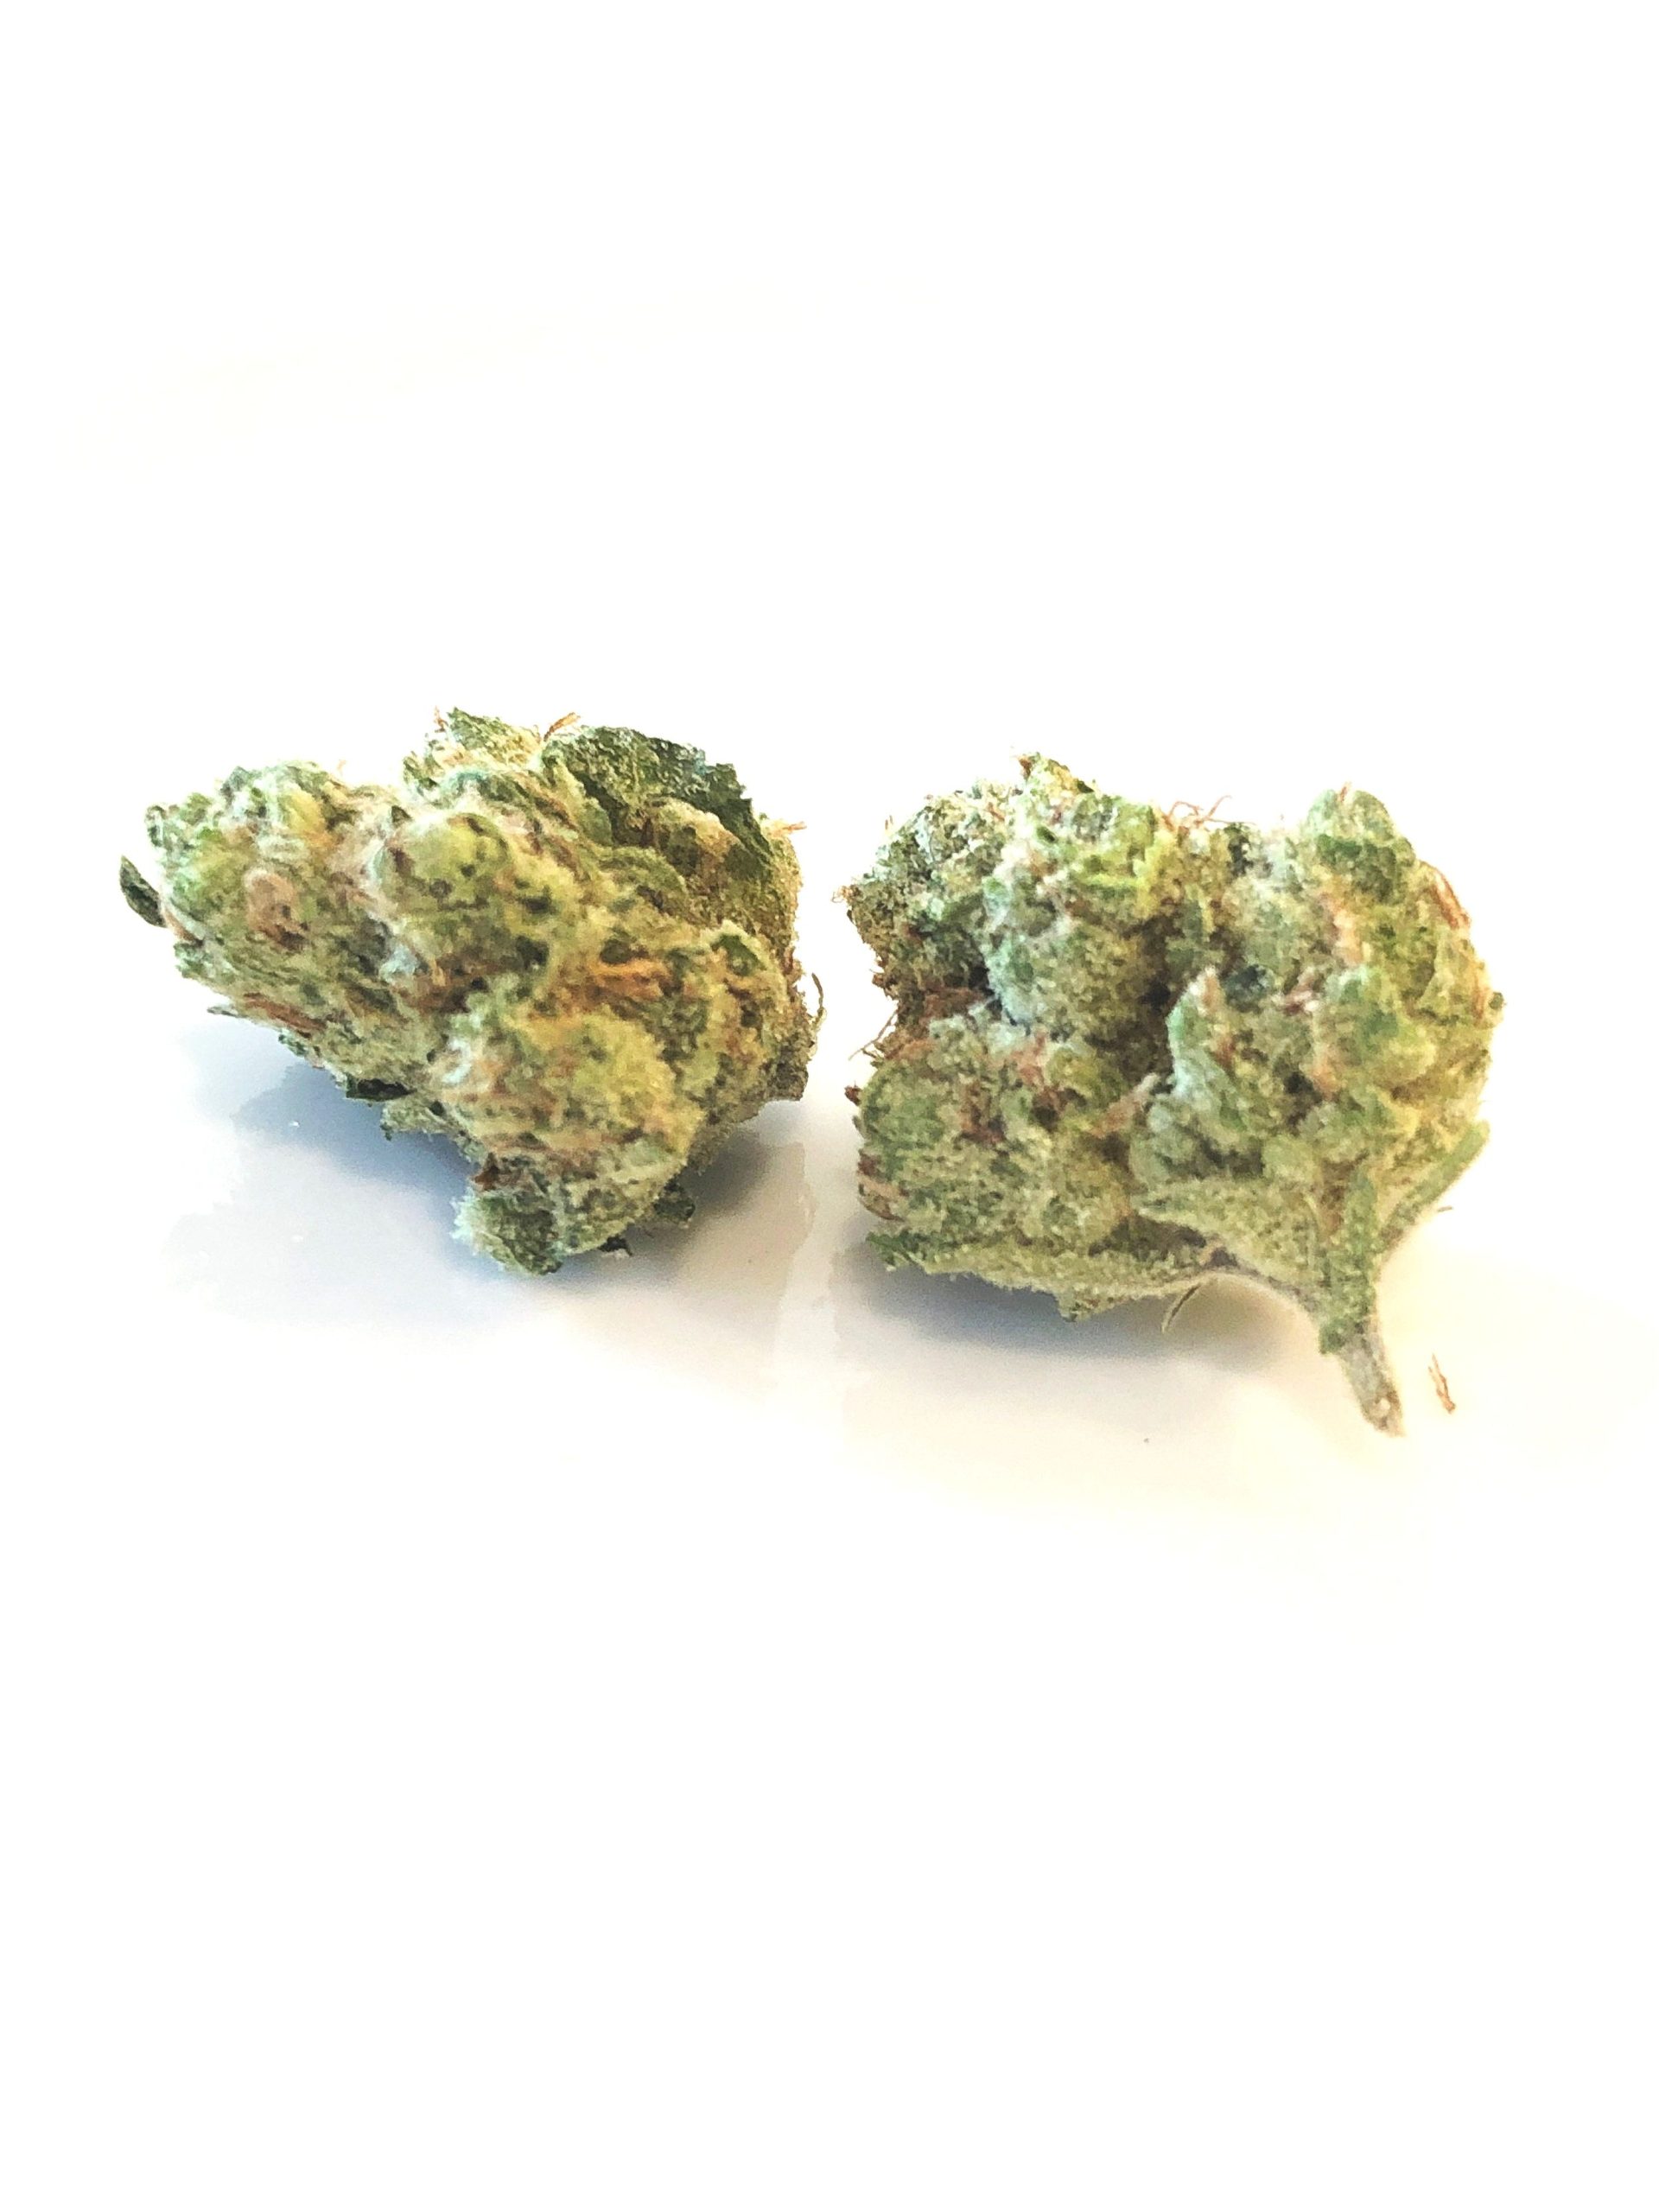 High-Quality Finds at DC Dispensaries